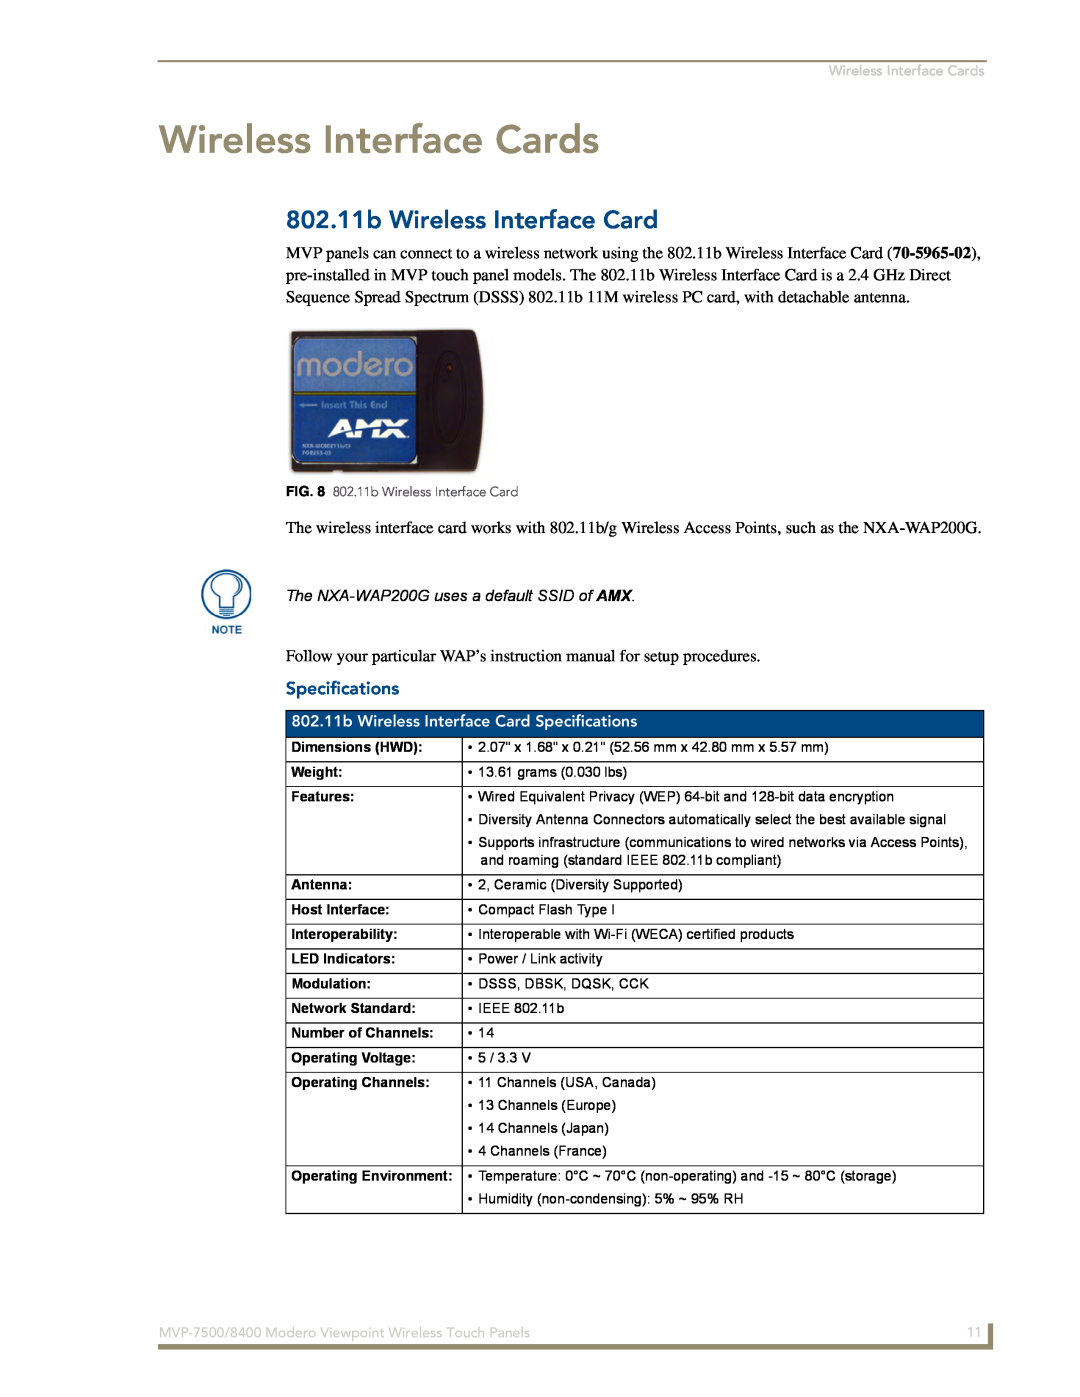 AMX MVP-8400i Wireless Interface Cards, 802.11b Wireless Interface Card, Specifications, Dimensions HWD, Weight, Features 